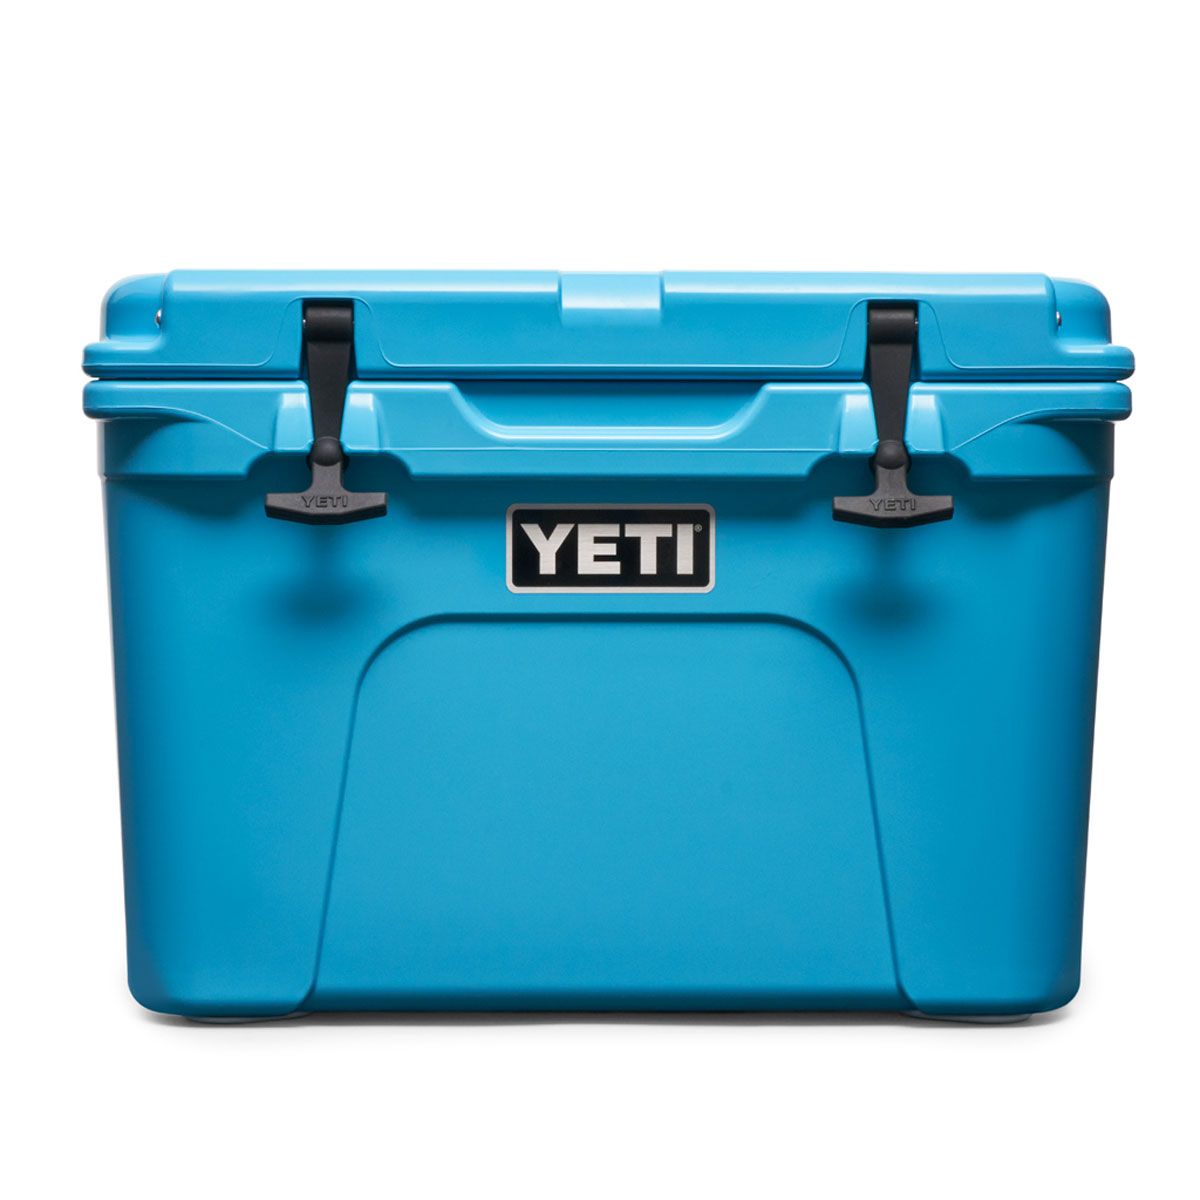 yeti coolers teal